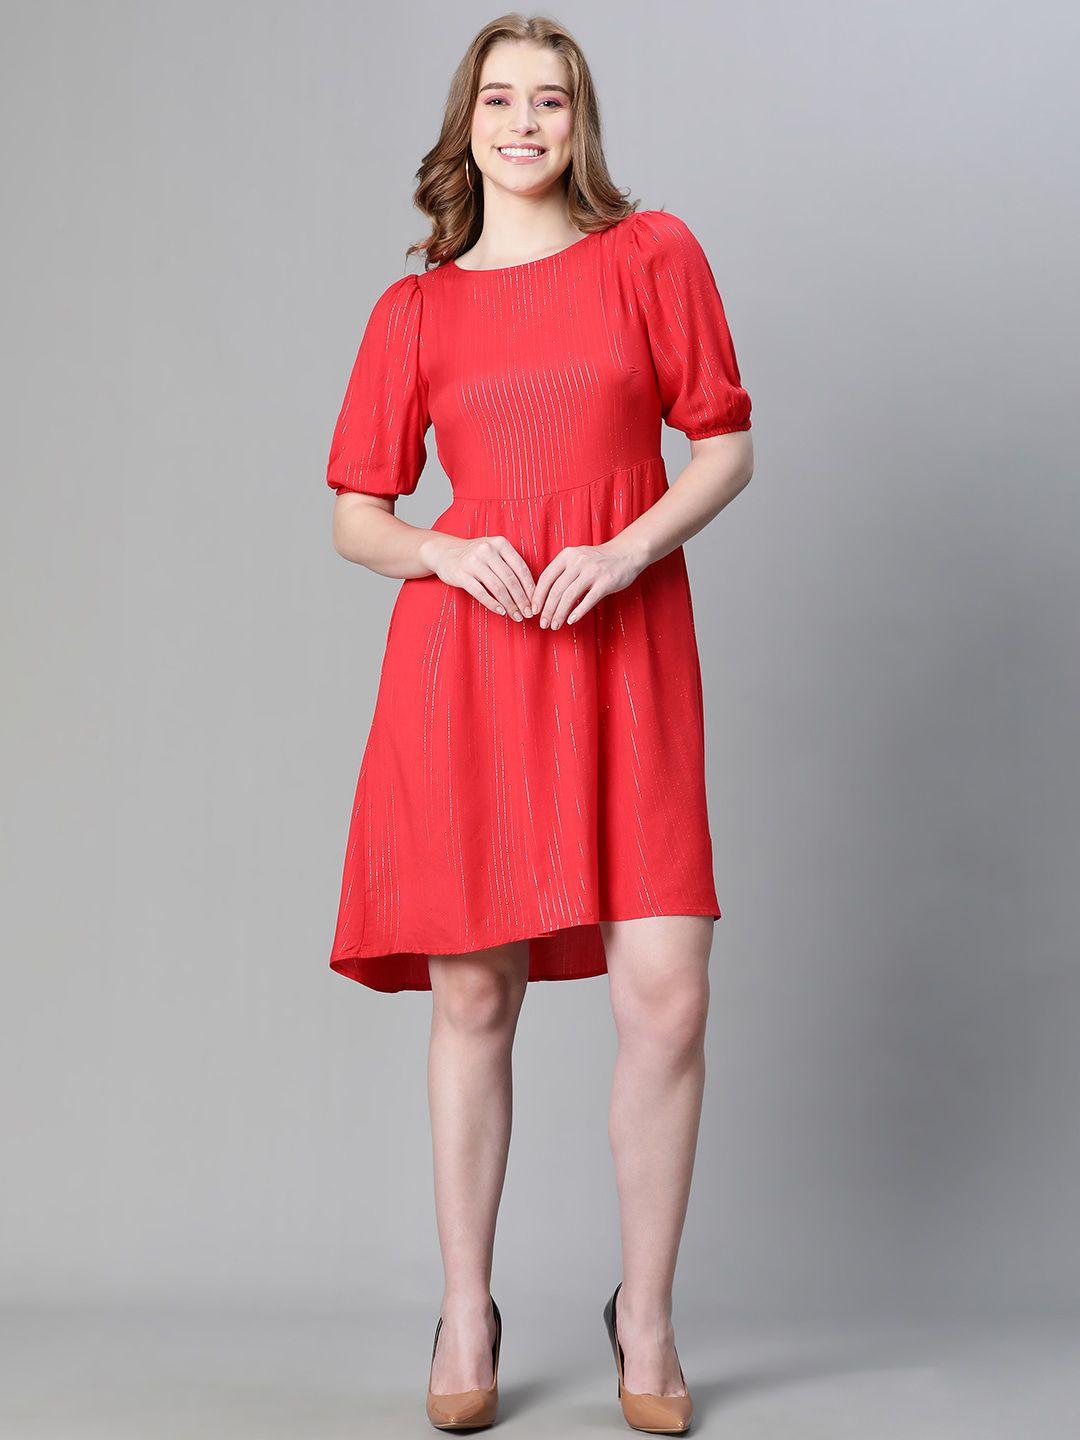 oxolloxo striped puff sleeve fit & flare dress